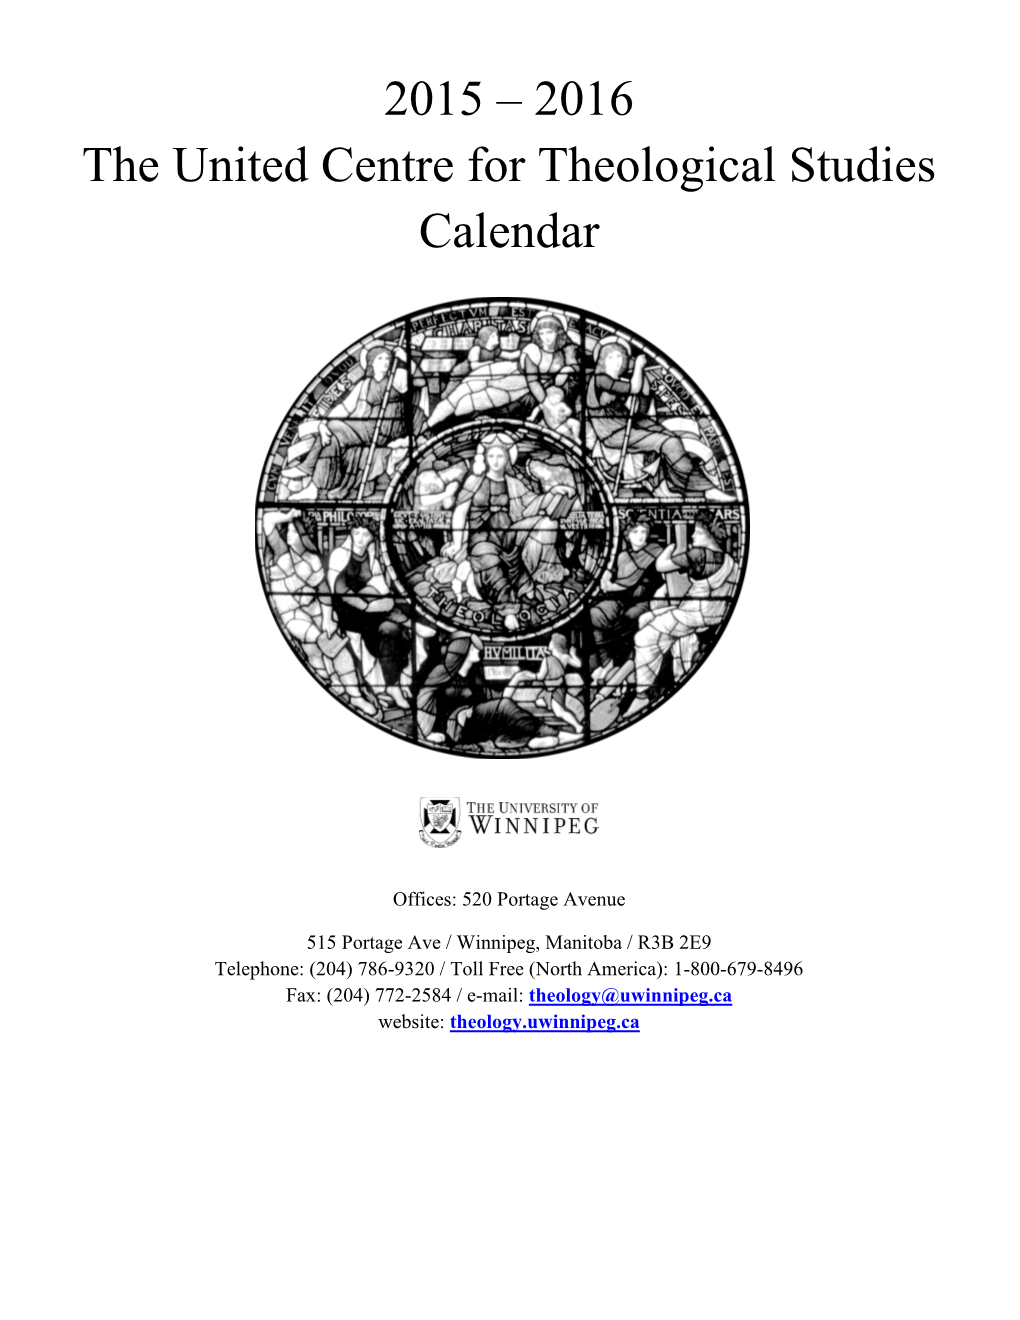 2015 – 2016 the United Centre for Theological Studies Calendar